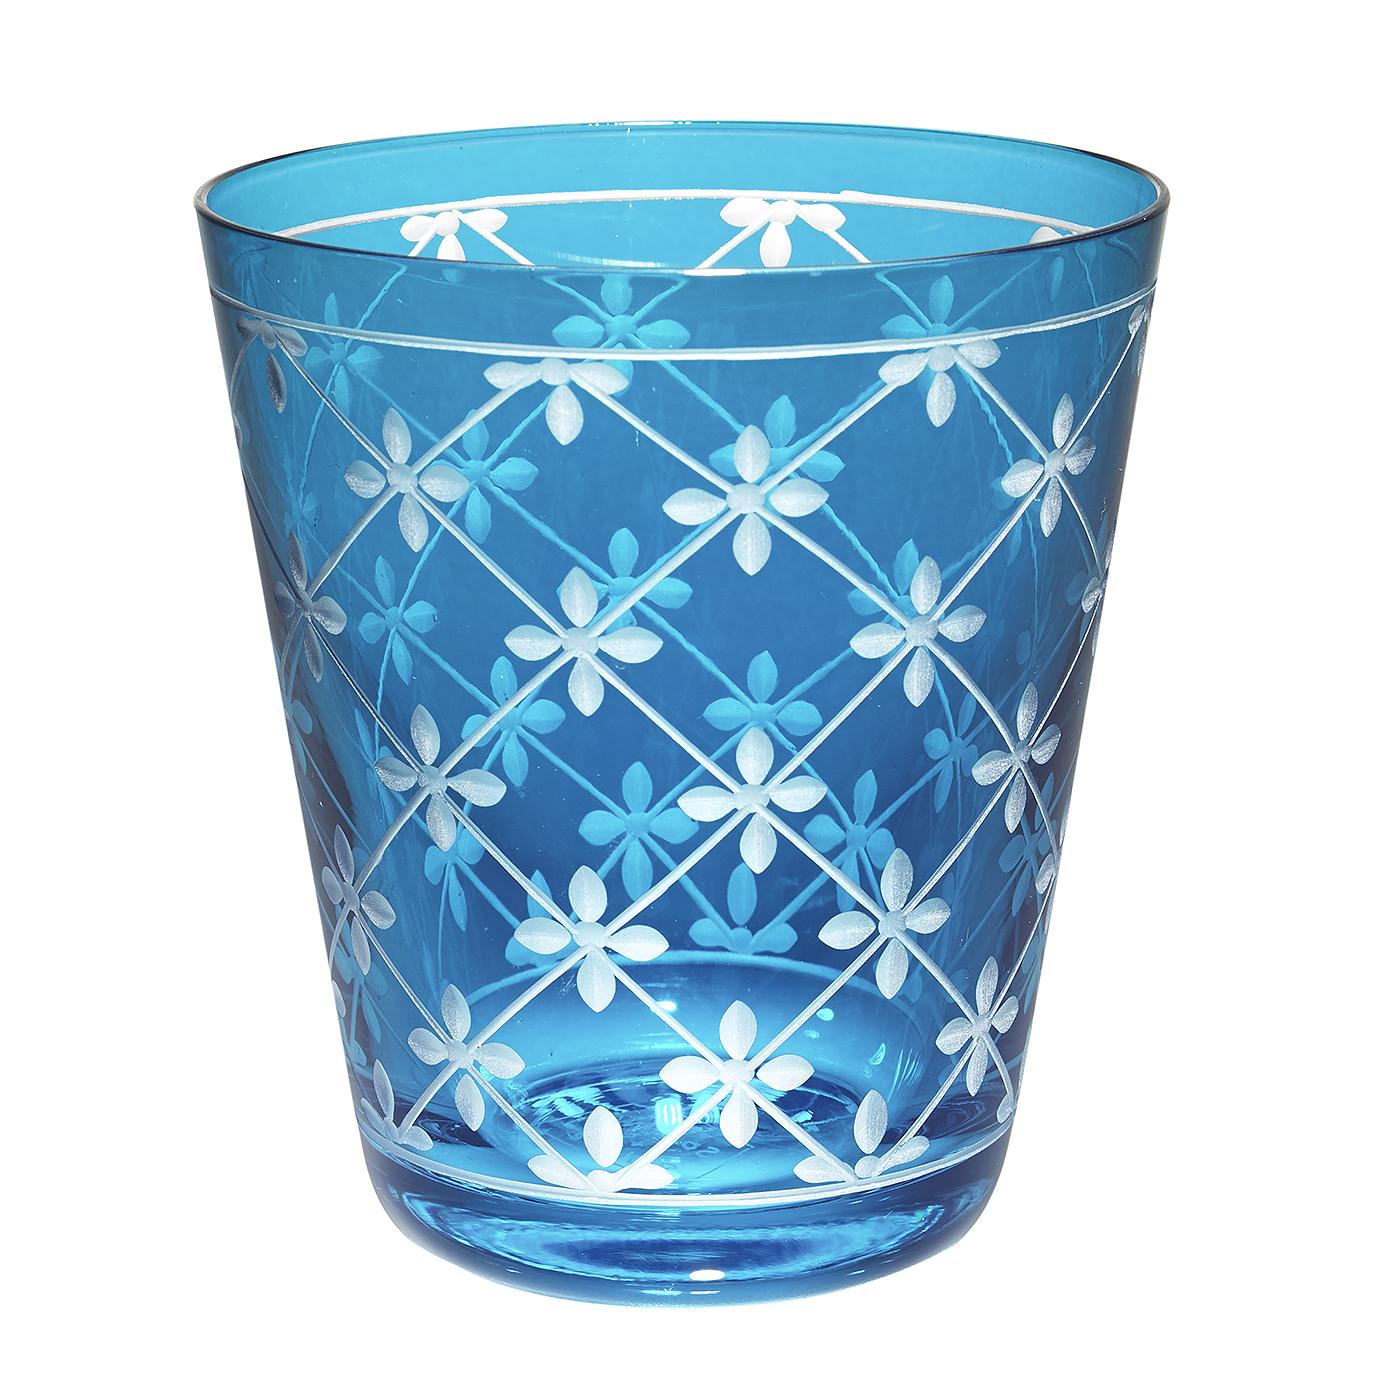 Set of 6 hand blown tumblers in blue crystal with a country style decor all around. A matching carafe can be ordered in addition. Can be ordered in different colors like blue, pink and green. Not recommend for dishwasher use
About Sofina